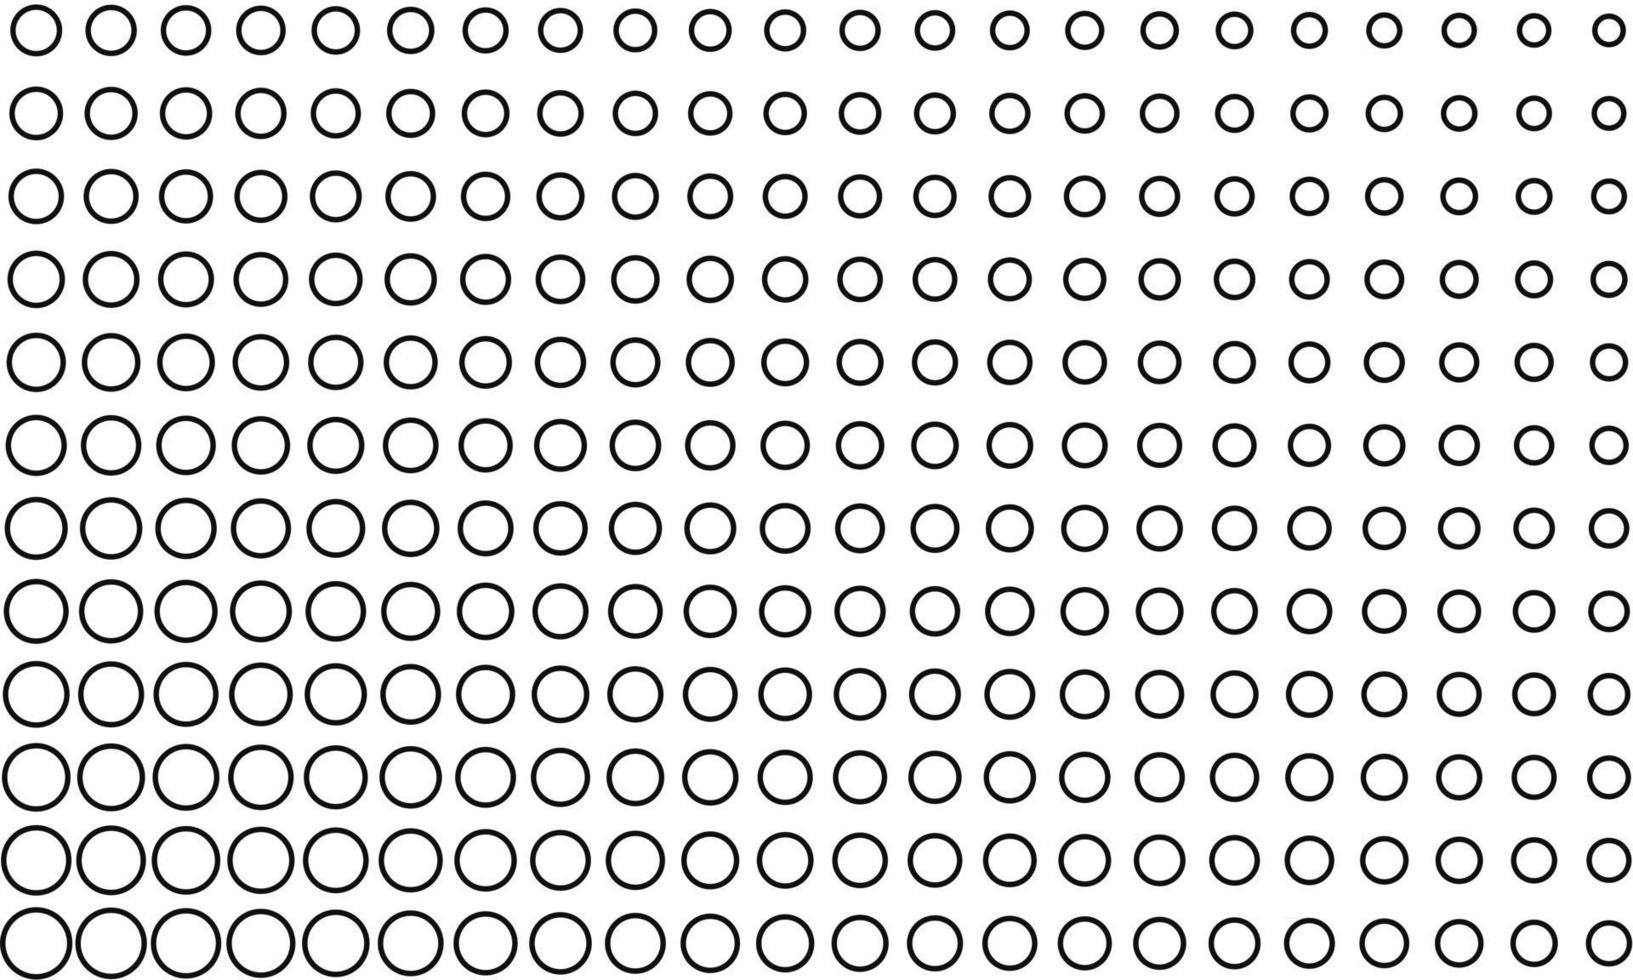 Black Outline Circles Seamless Pattern vector